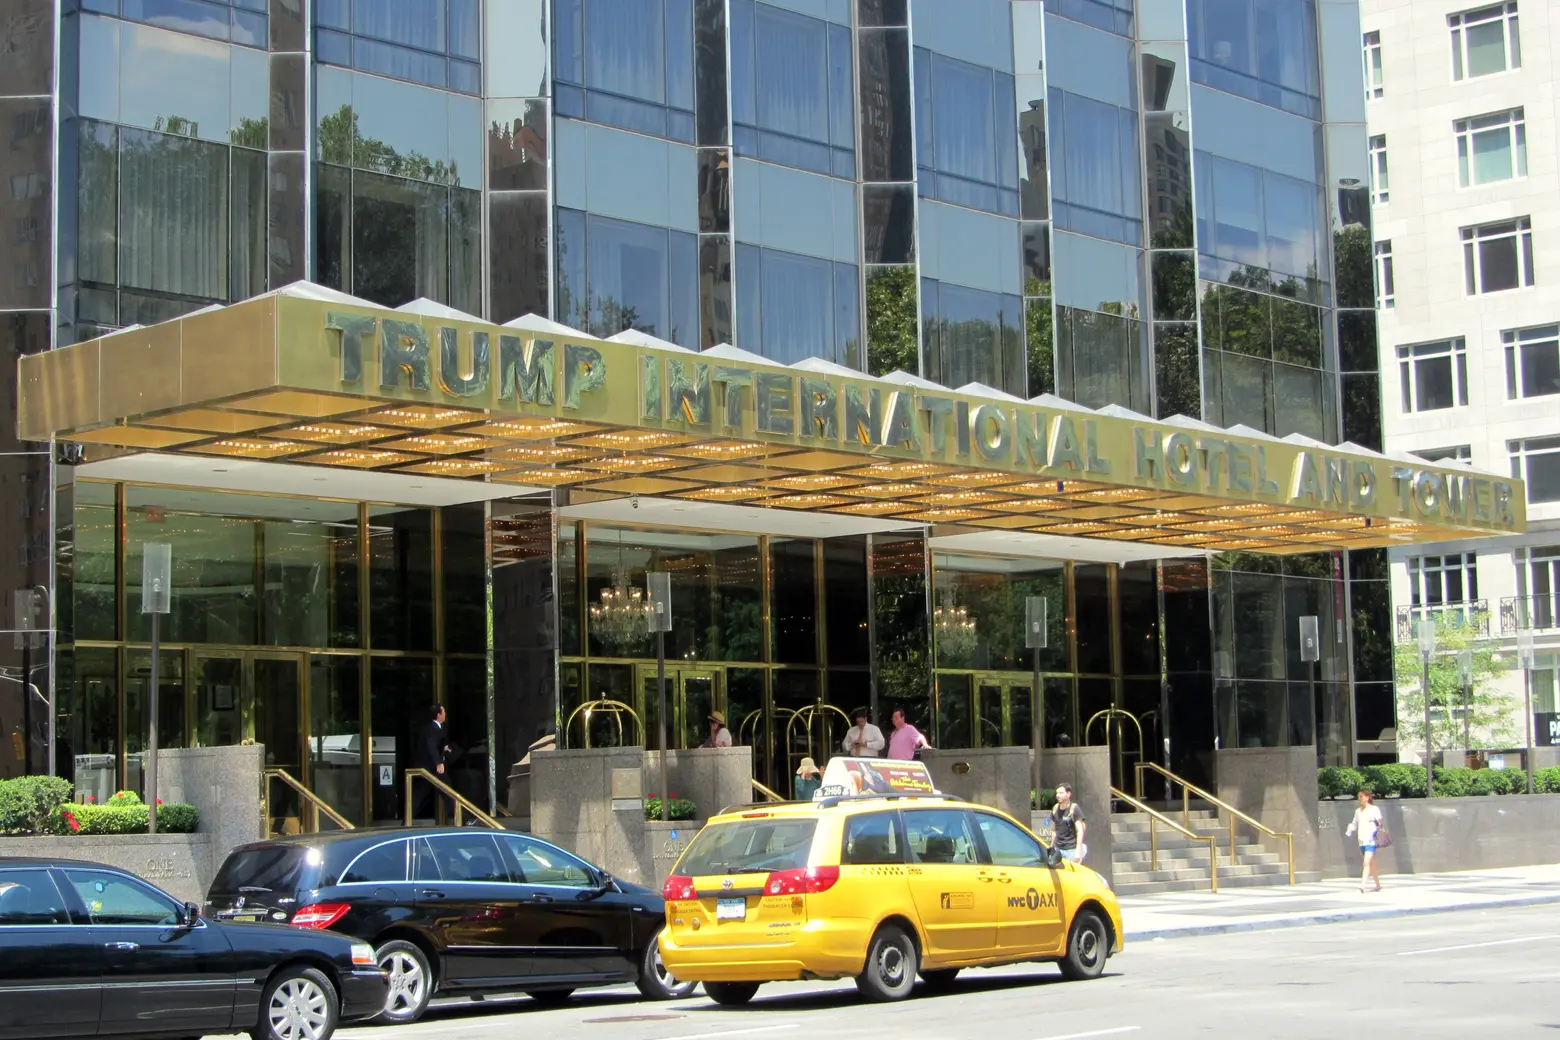 Condo board at Trump’s Central Park West building votes to keep president’s name on signage